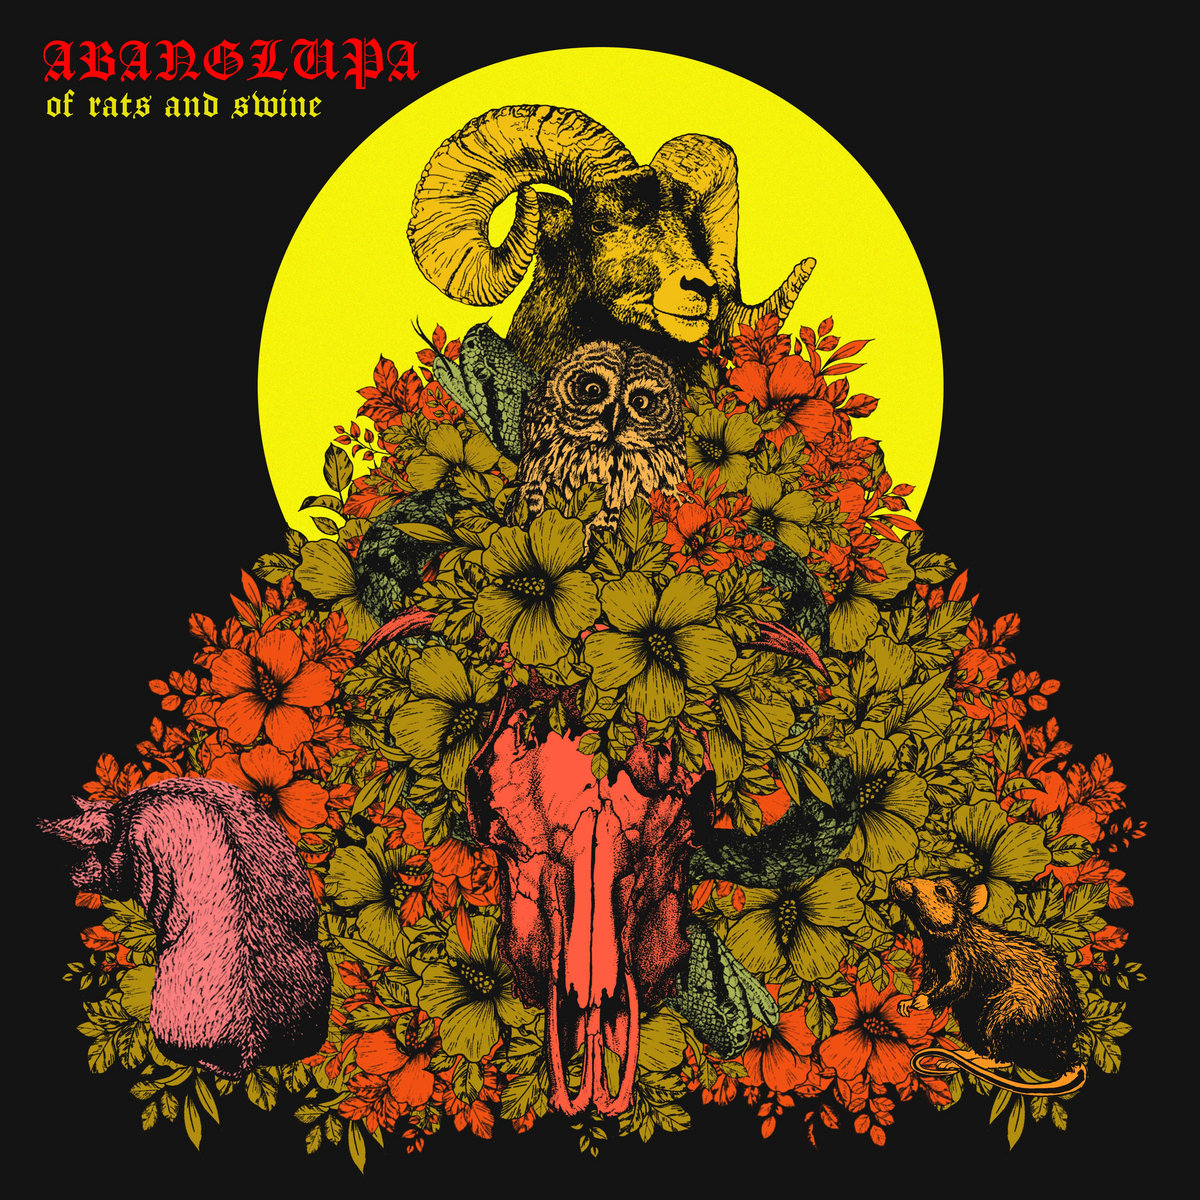 ALBUM REVIEW: ABANGLUPA – Of Rats And Swine